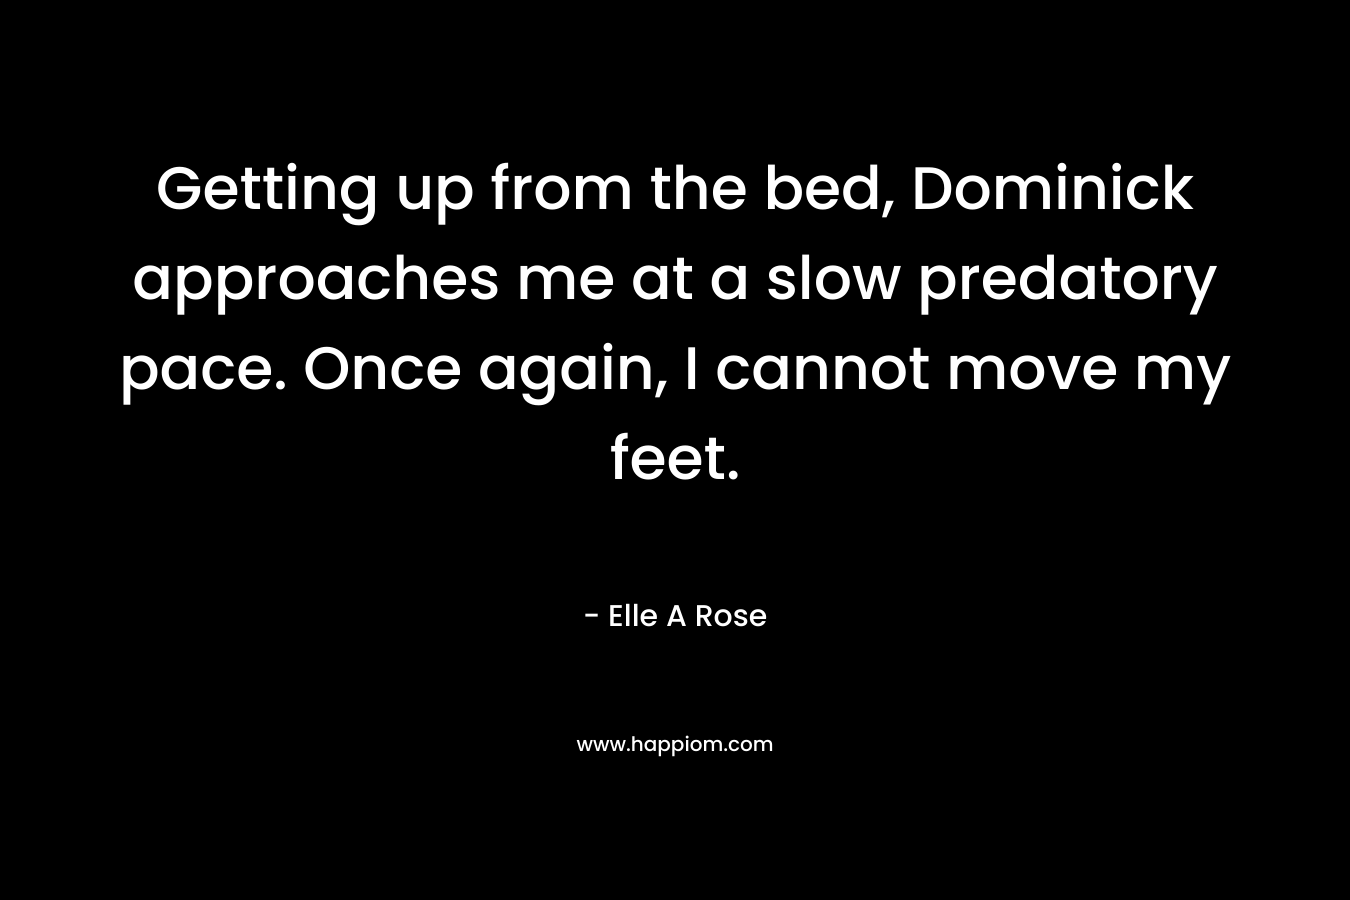 Getting up from the bed, Dominick approaches me at a slow predatory pace. Once again, I cannot move my feet. – Elle A Rose